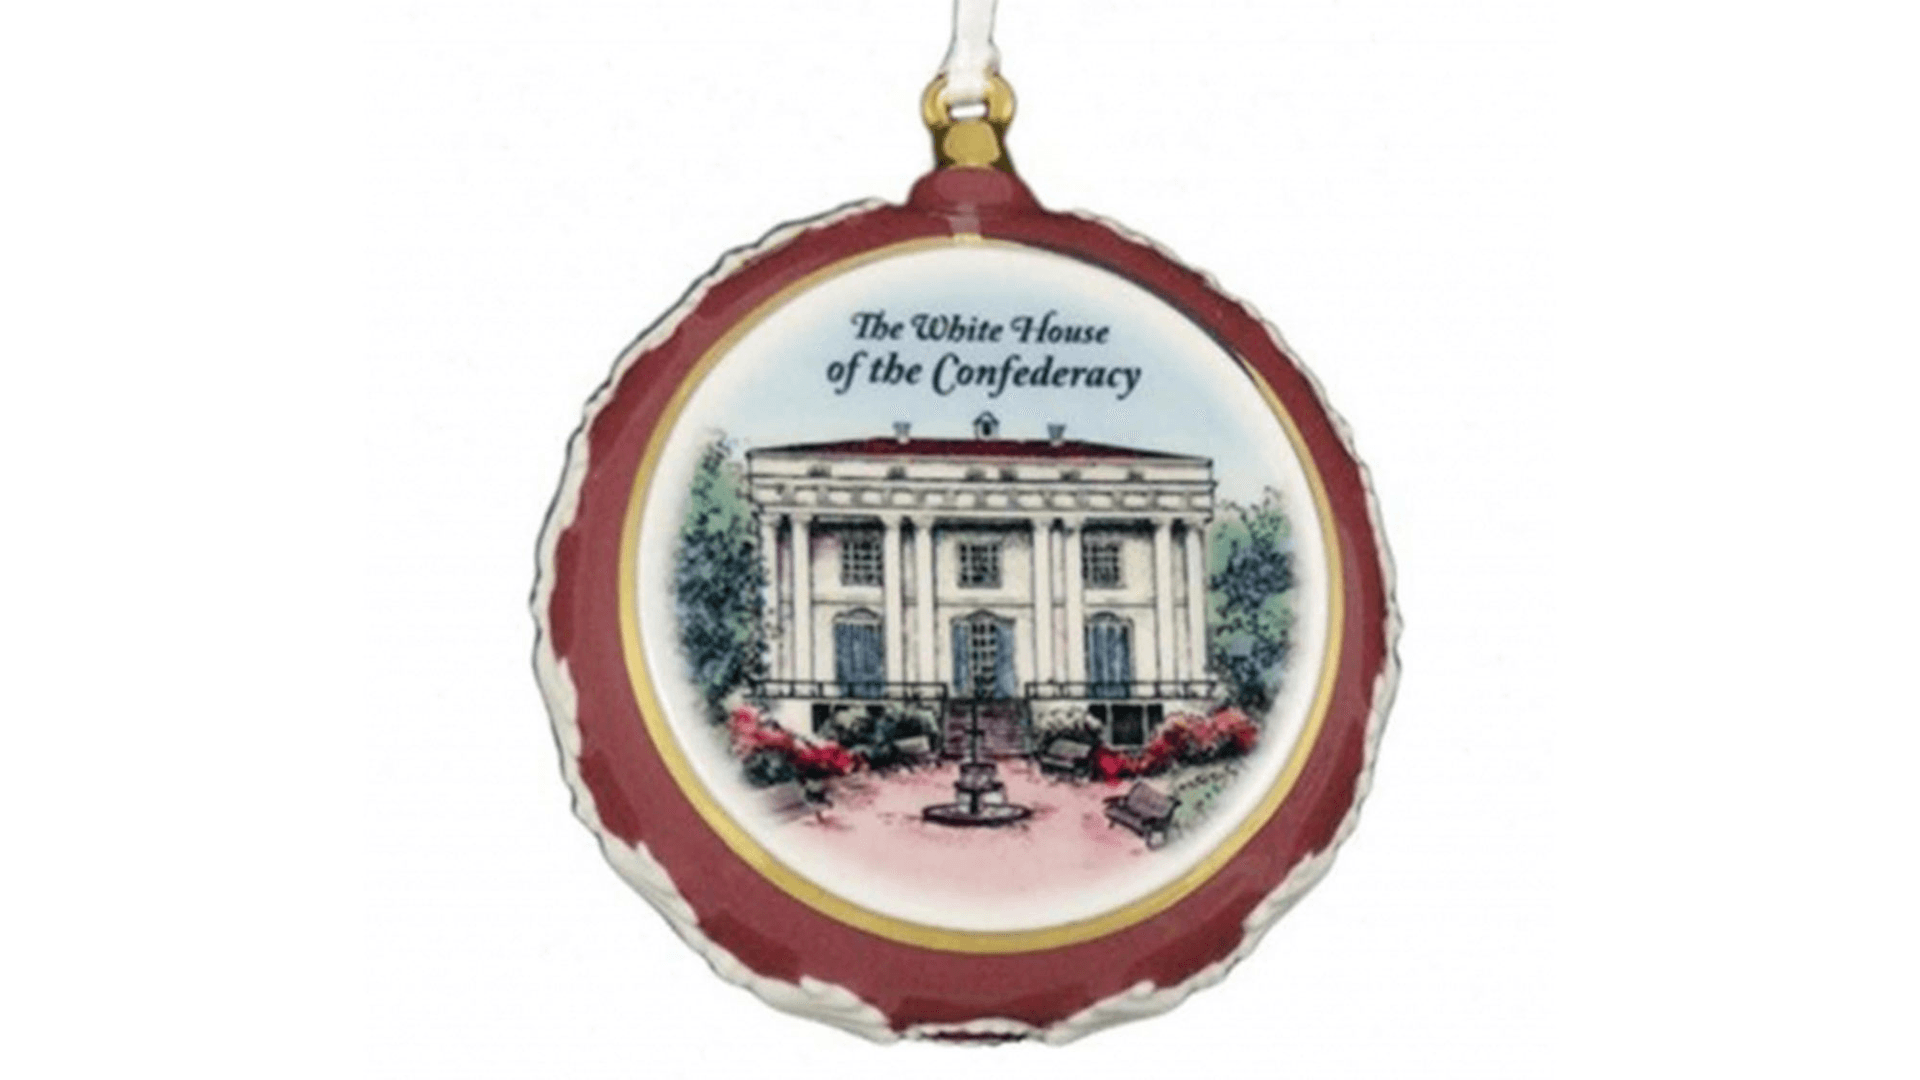 A decorative ornament on sale at the White House of the Confederacy.